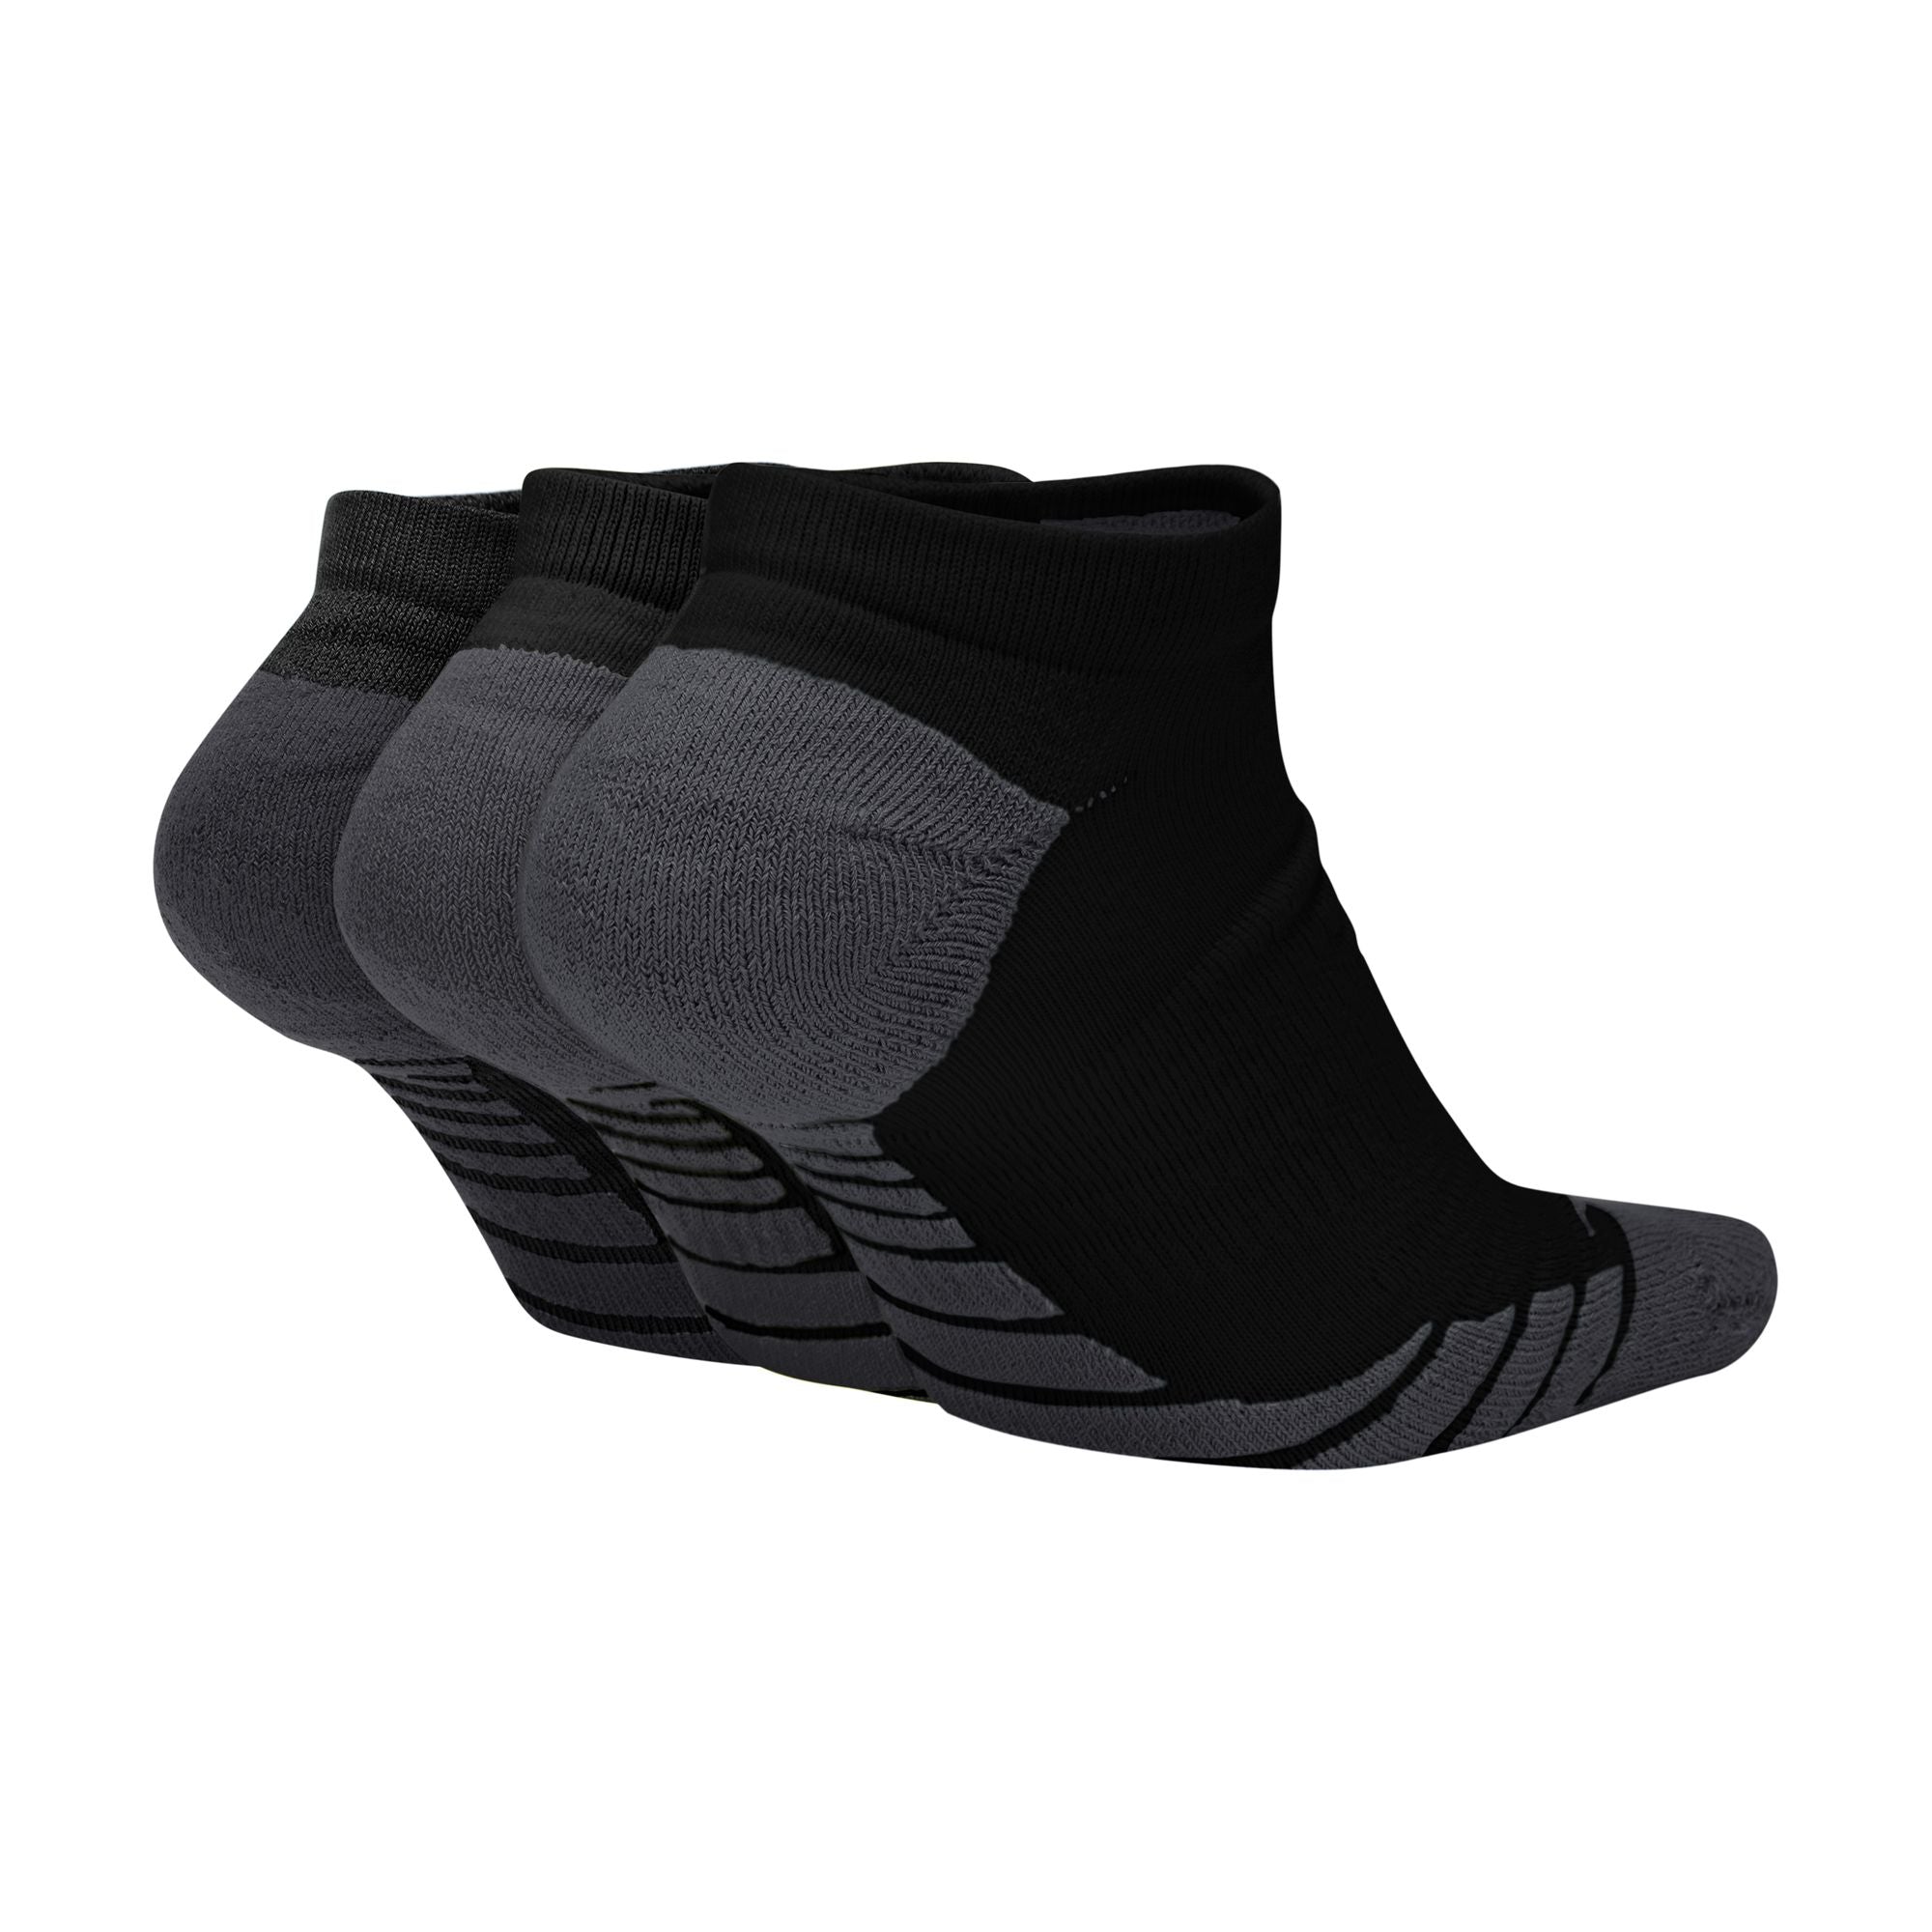 Nike Everyday Essential Ankle 3 Pack Socks - Black/Anthracite/White